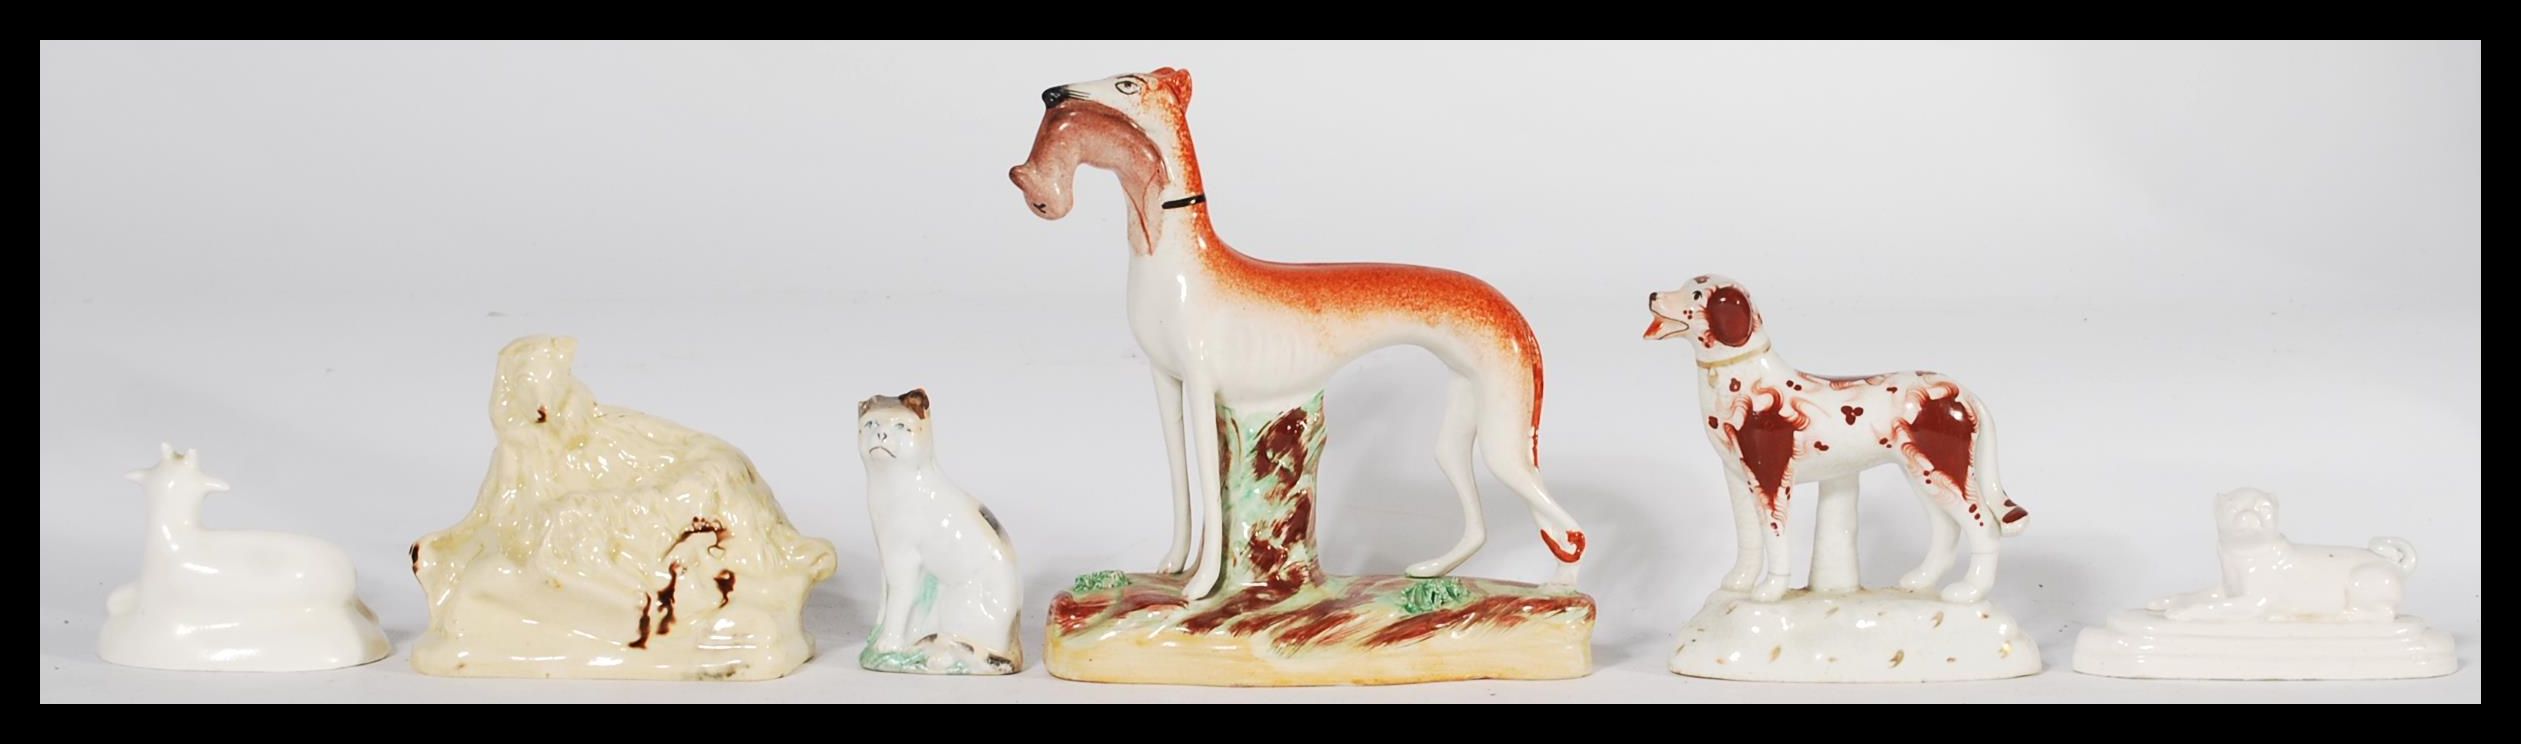 A group of Staffordshire ceramic figures of animals dating from the 18th century to include Canary - Image 3 of 7